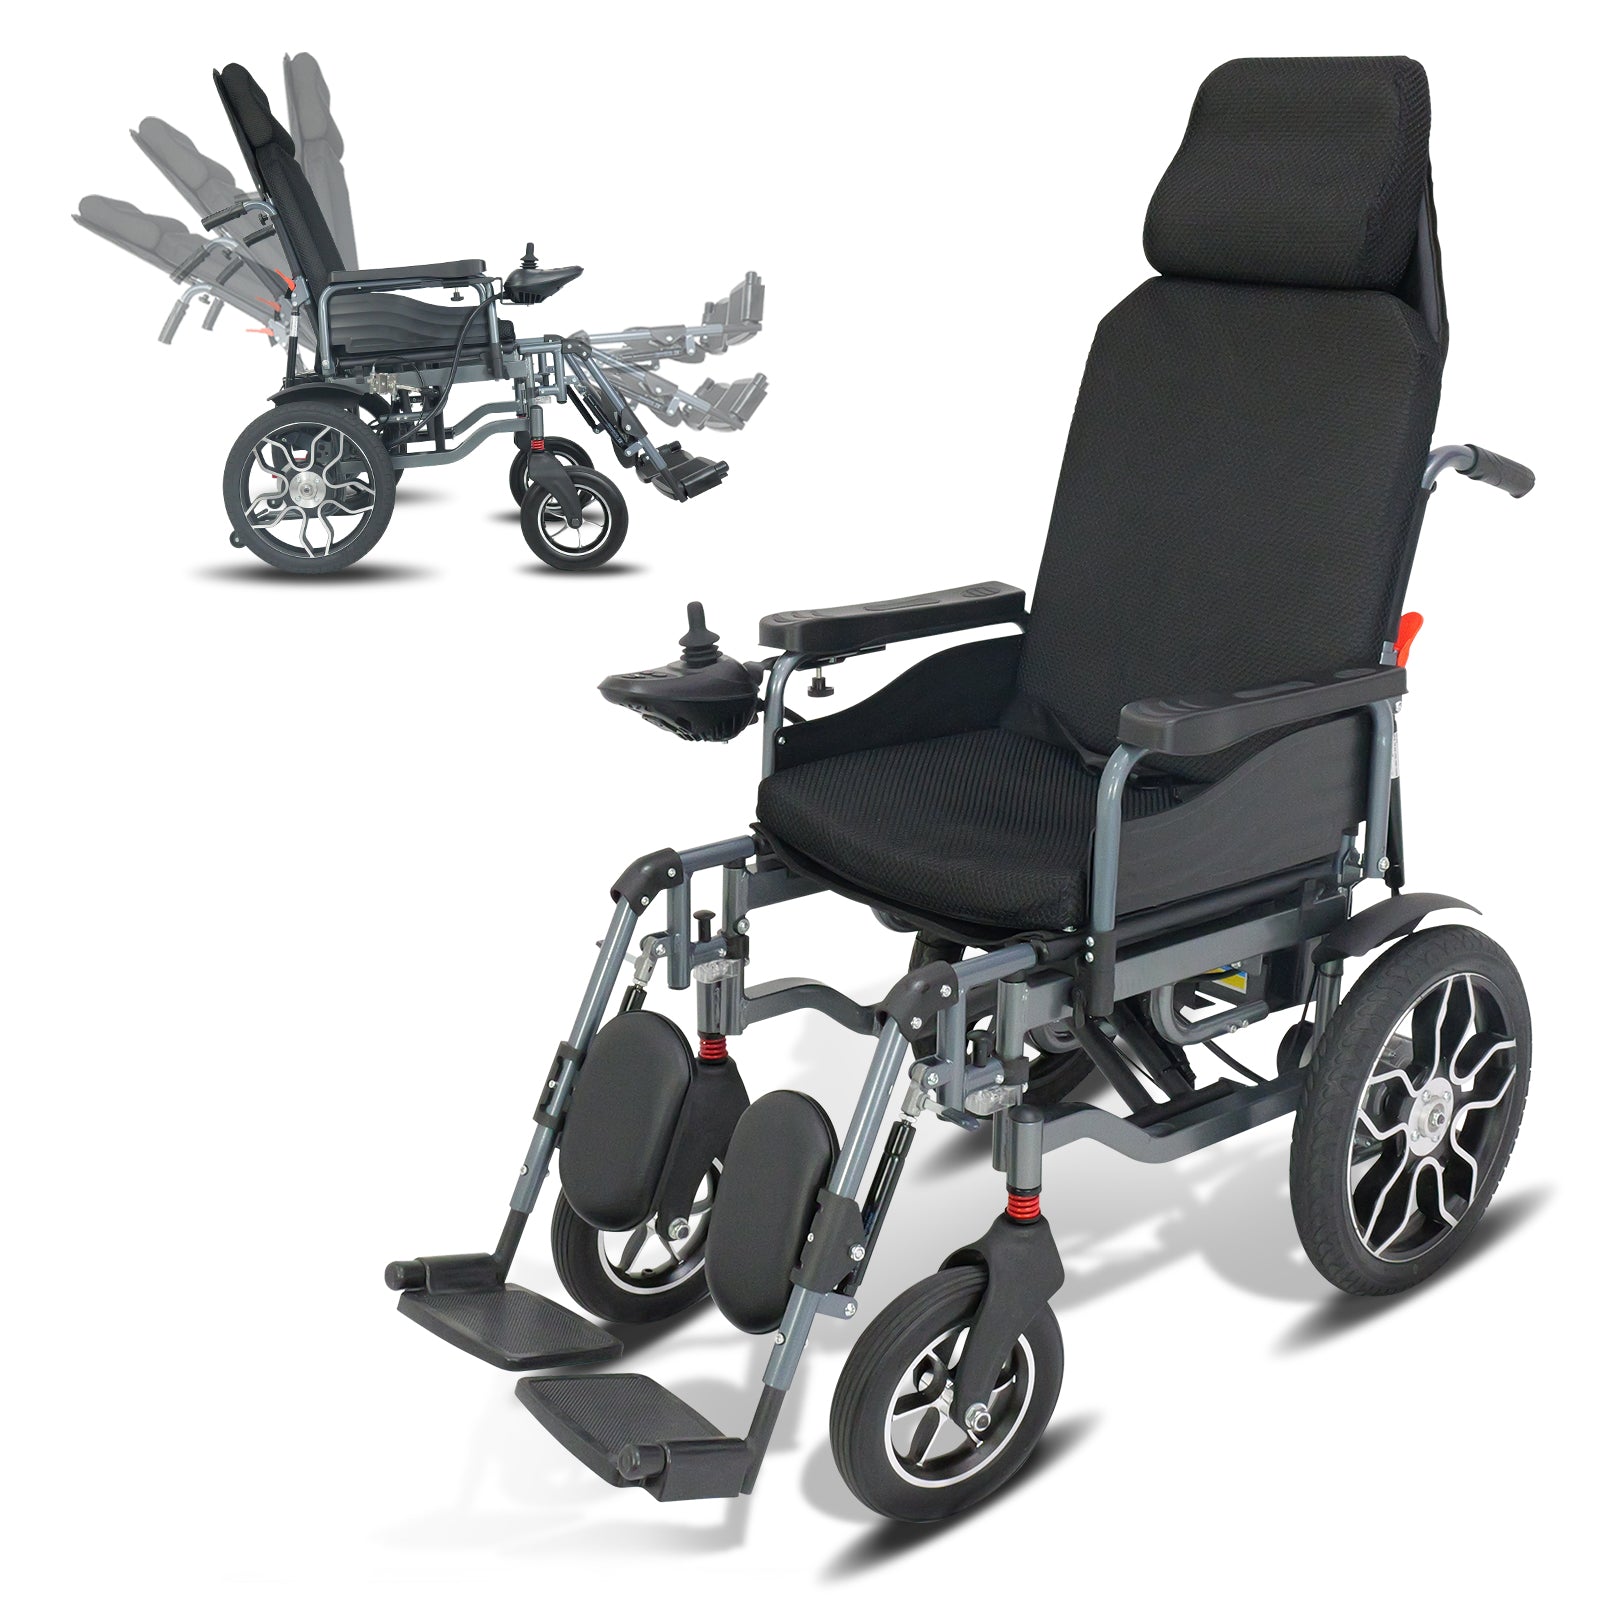 Luxury Power Wheelchair for Disabled and senior, Lightweight and Foldable, All Terrain Portable Reclining Electric Wheelchair